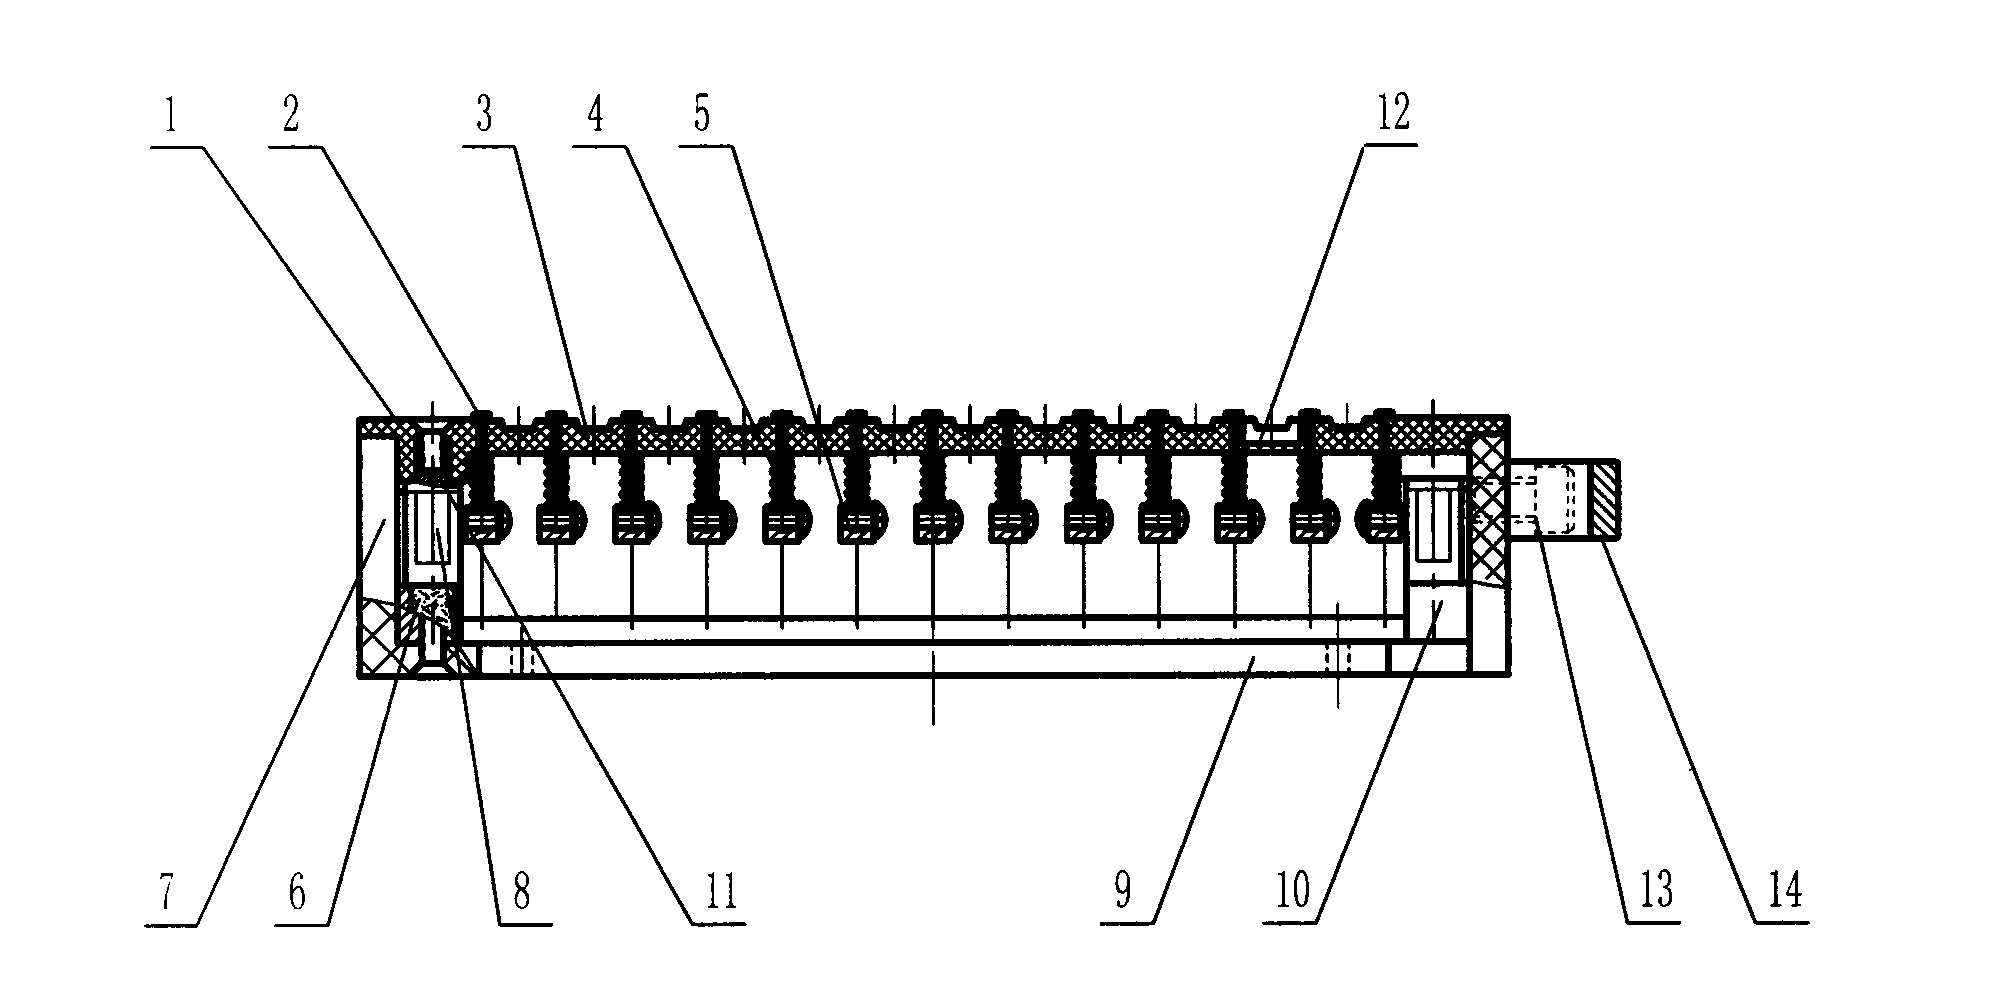 Composite pressing clamp of panel-type electrode bracket for COMMB-LED (chip on mirror metal board-light emitting diode)